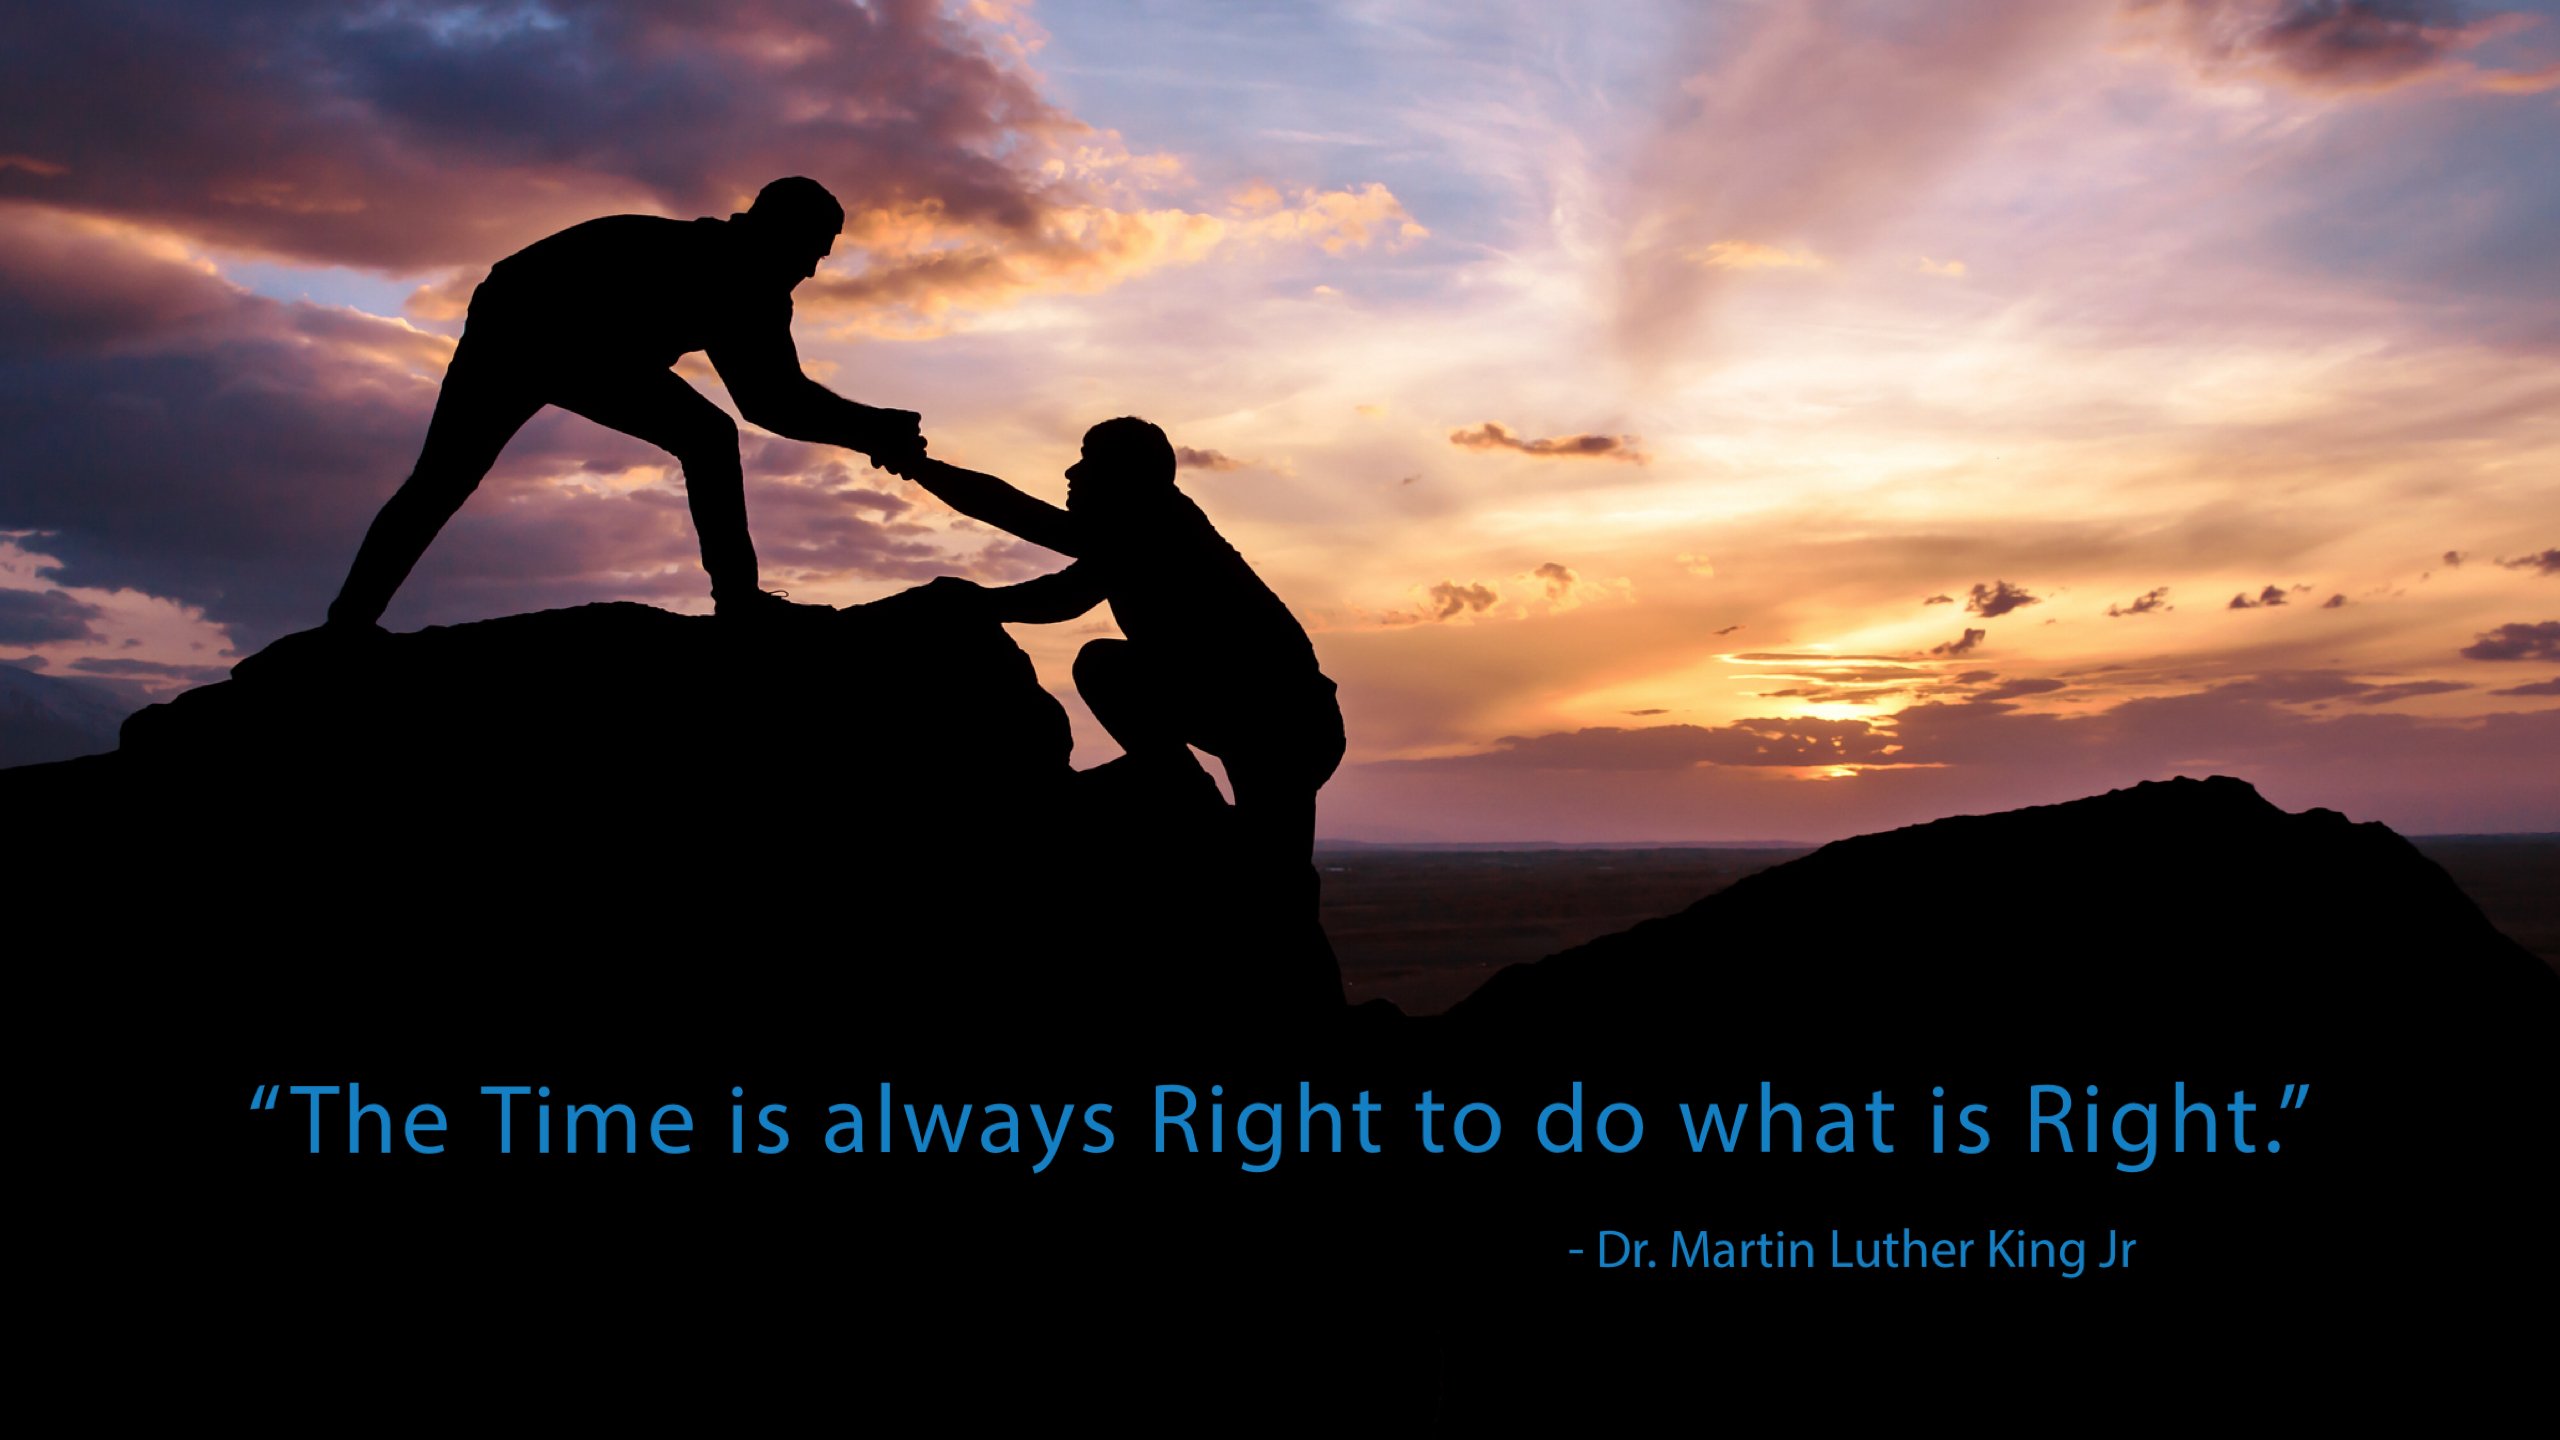 Quote by Dr Martin Luther King Jr